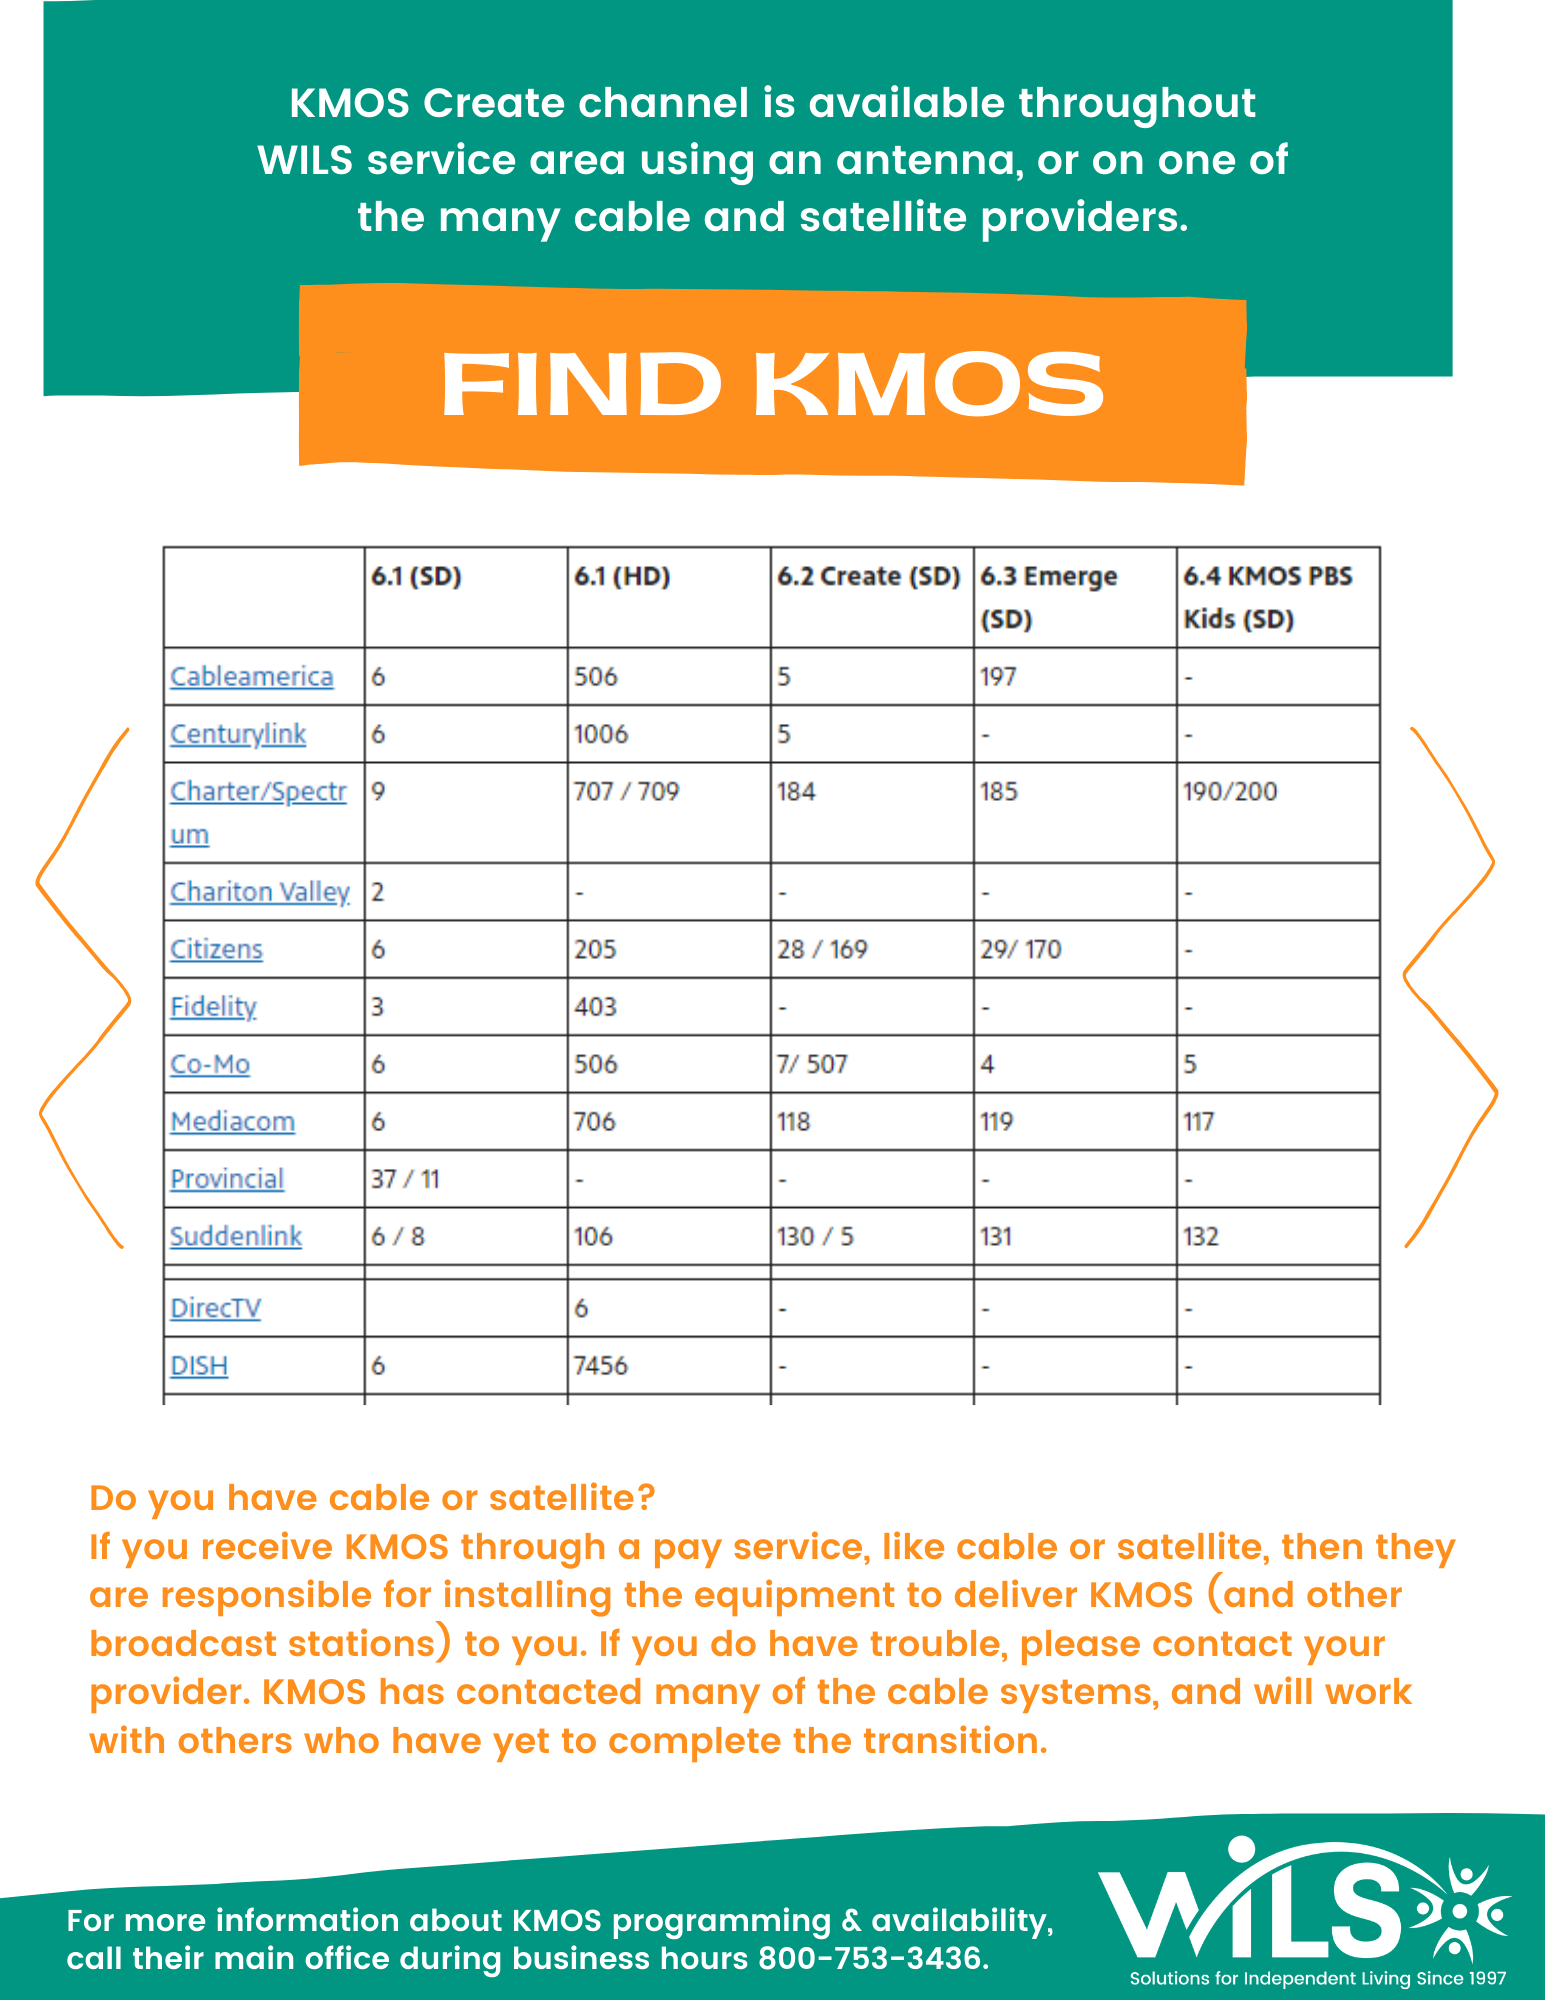 KMOS Create channel is available throughout WILS service area using an antenna, or on one of the many cable and satellite providers. Find KMOS at https://kmos.org/about/where-to-watch/